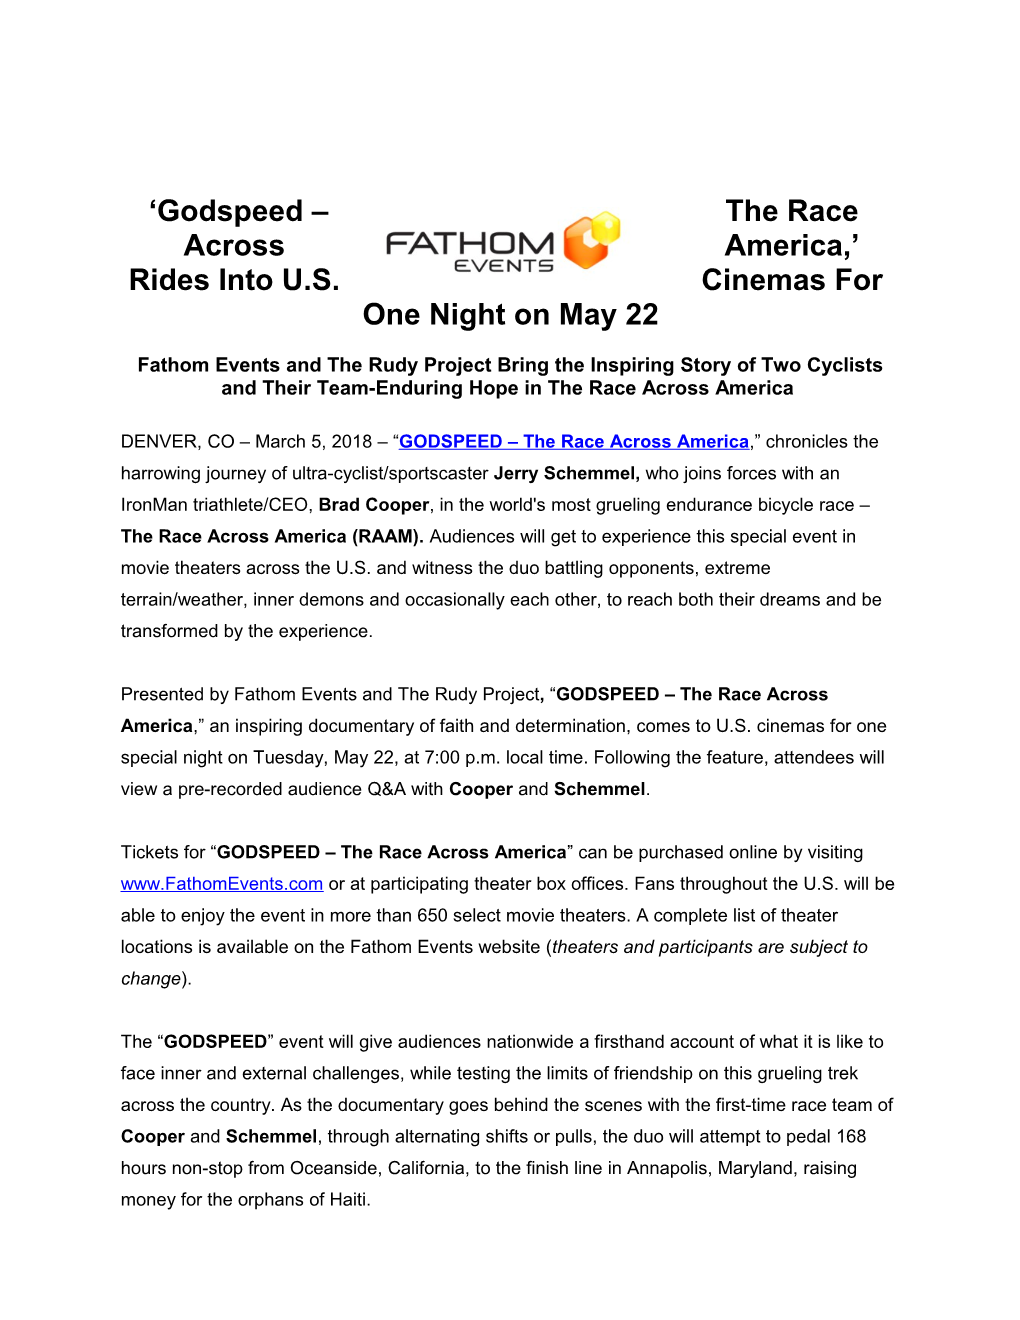 Fathom Events and the Rudy Project Bring the Inspiring Story of Two Cyclists and Their